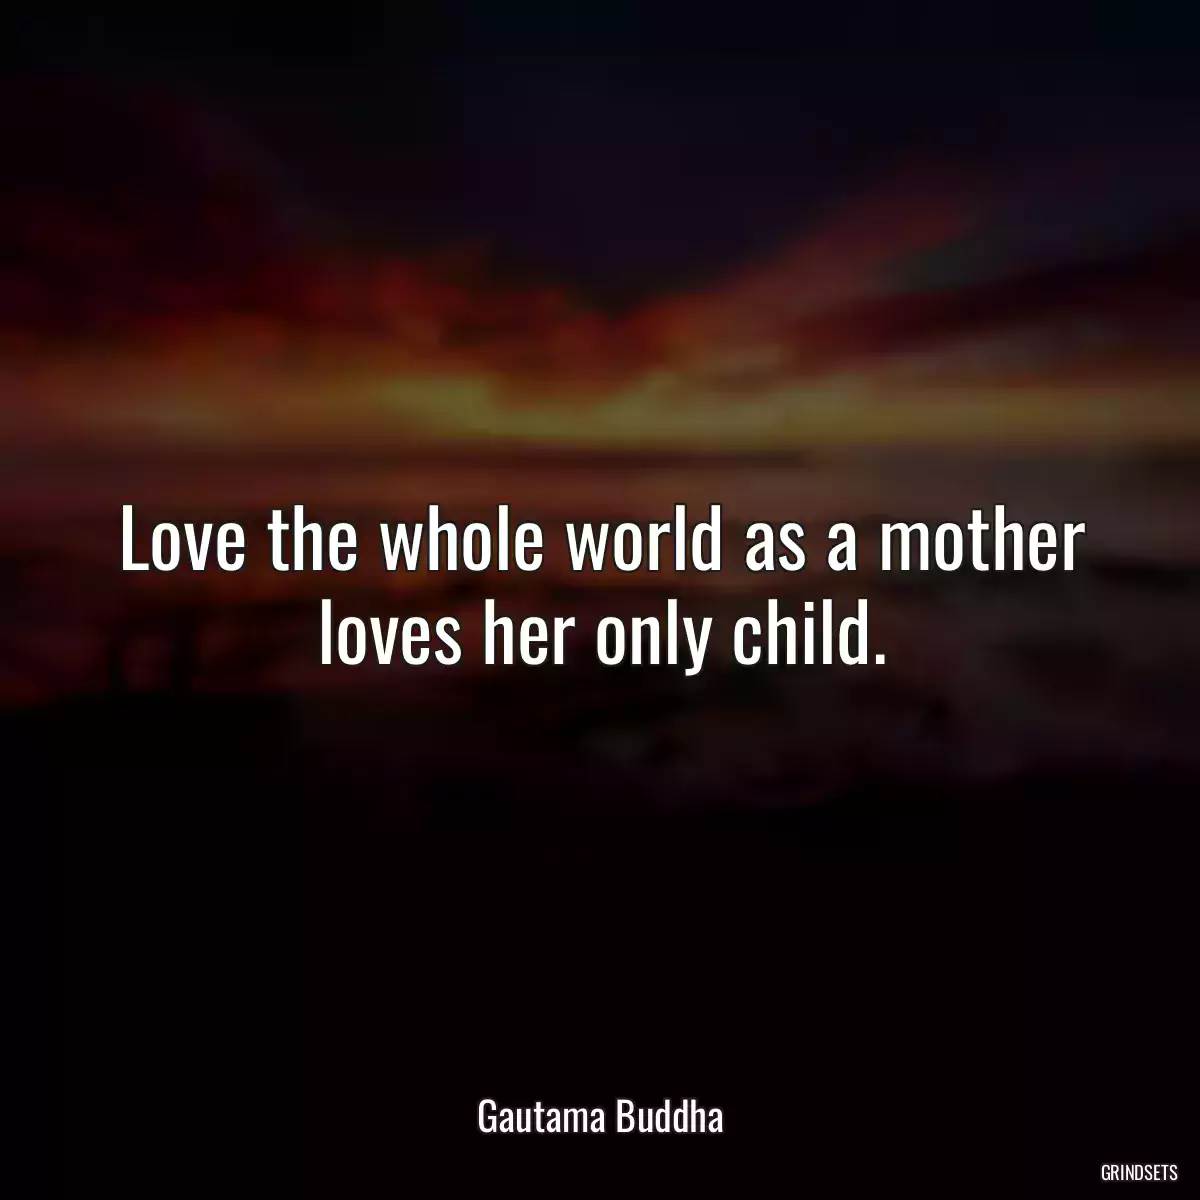 Love the whole world as a mother loves her only child.